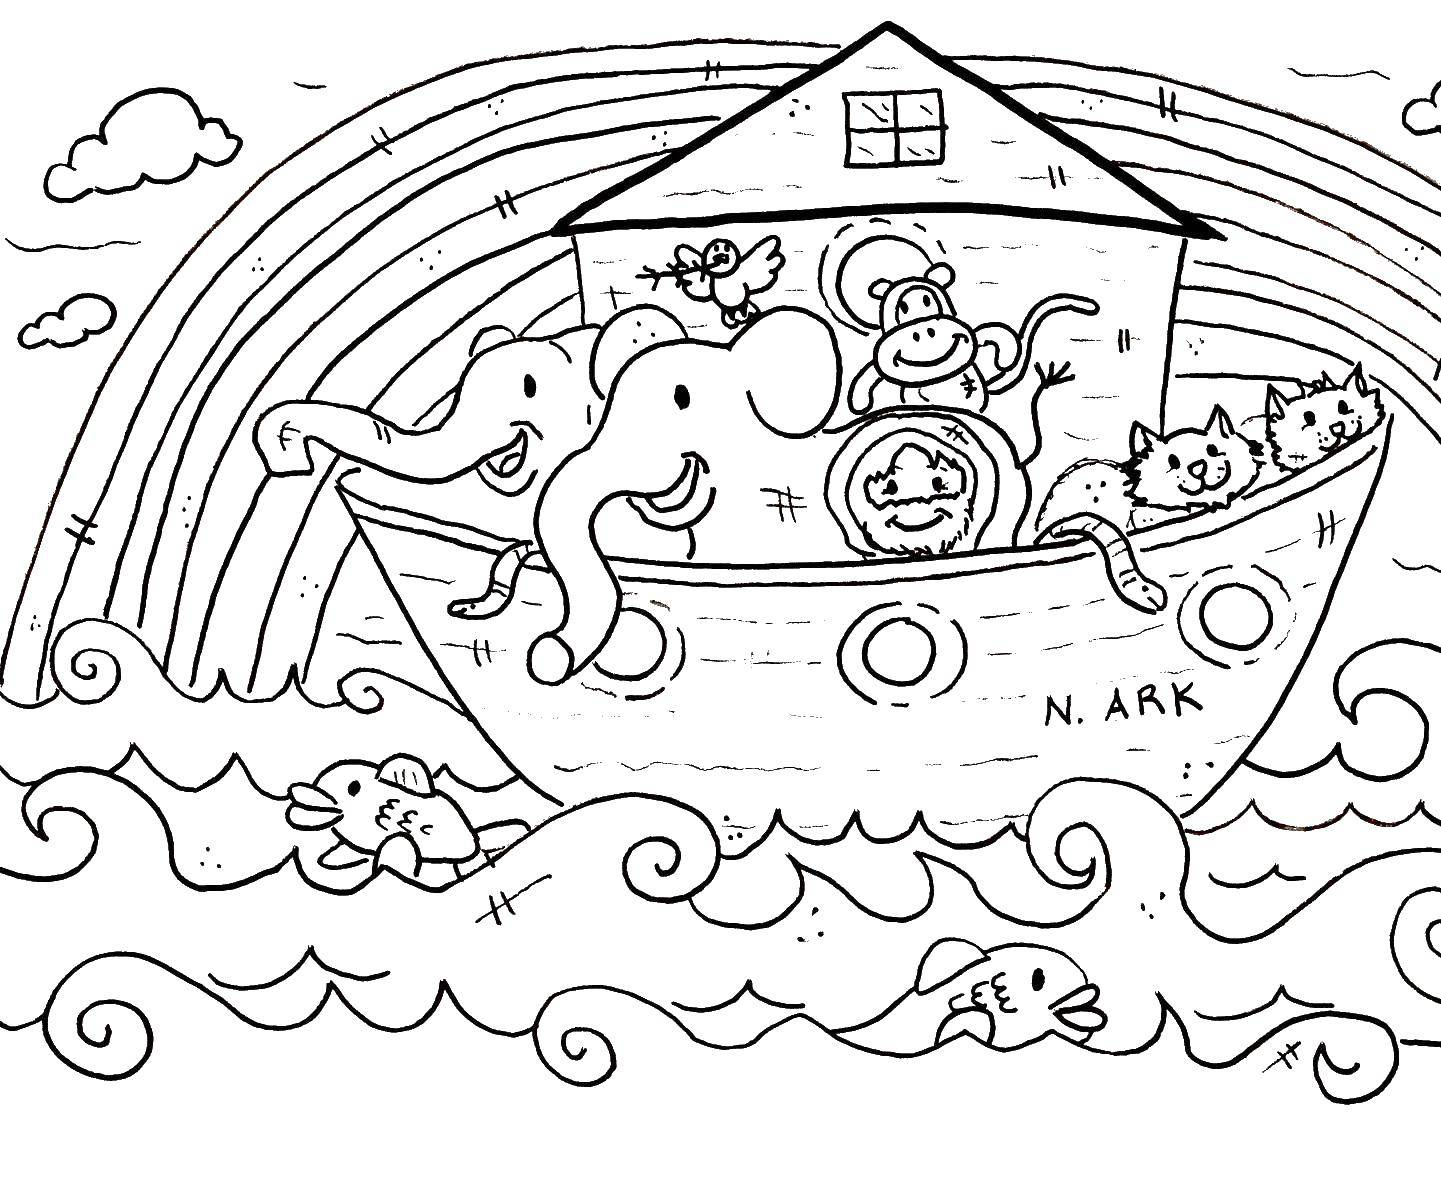 Coloring The ark. Category the Bible. Tags:  the Bible, Noah, the ark.